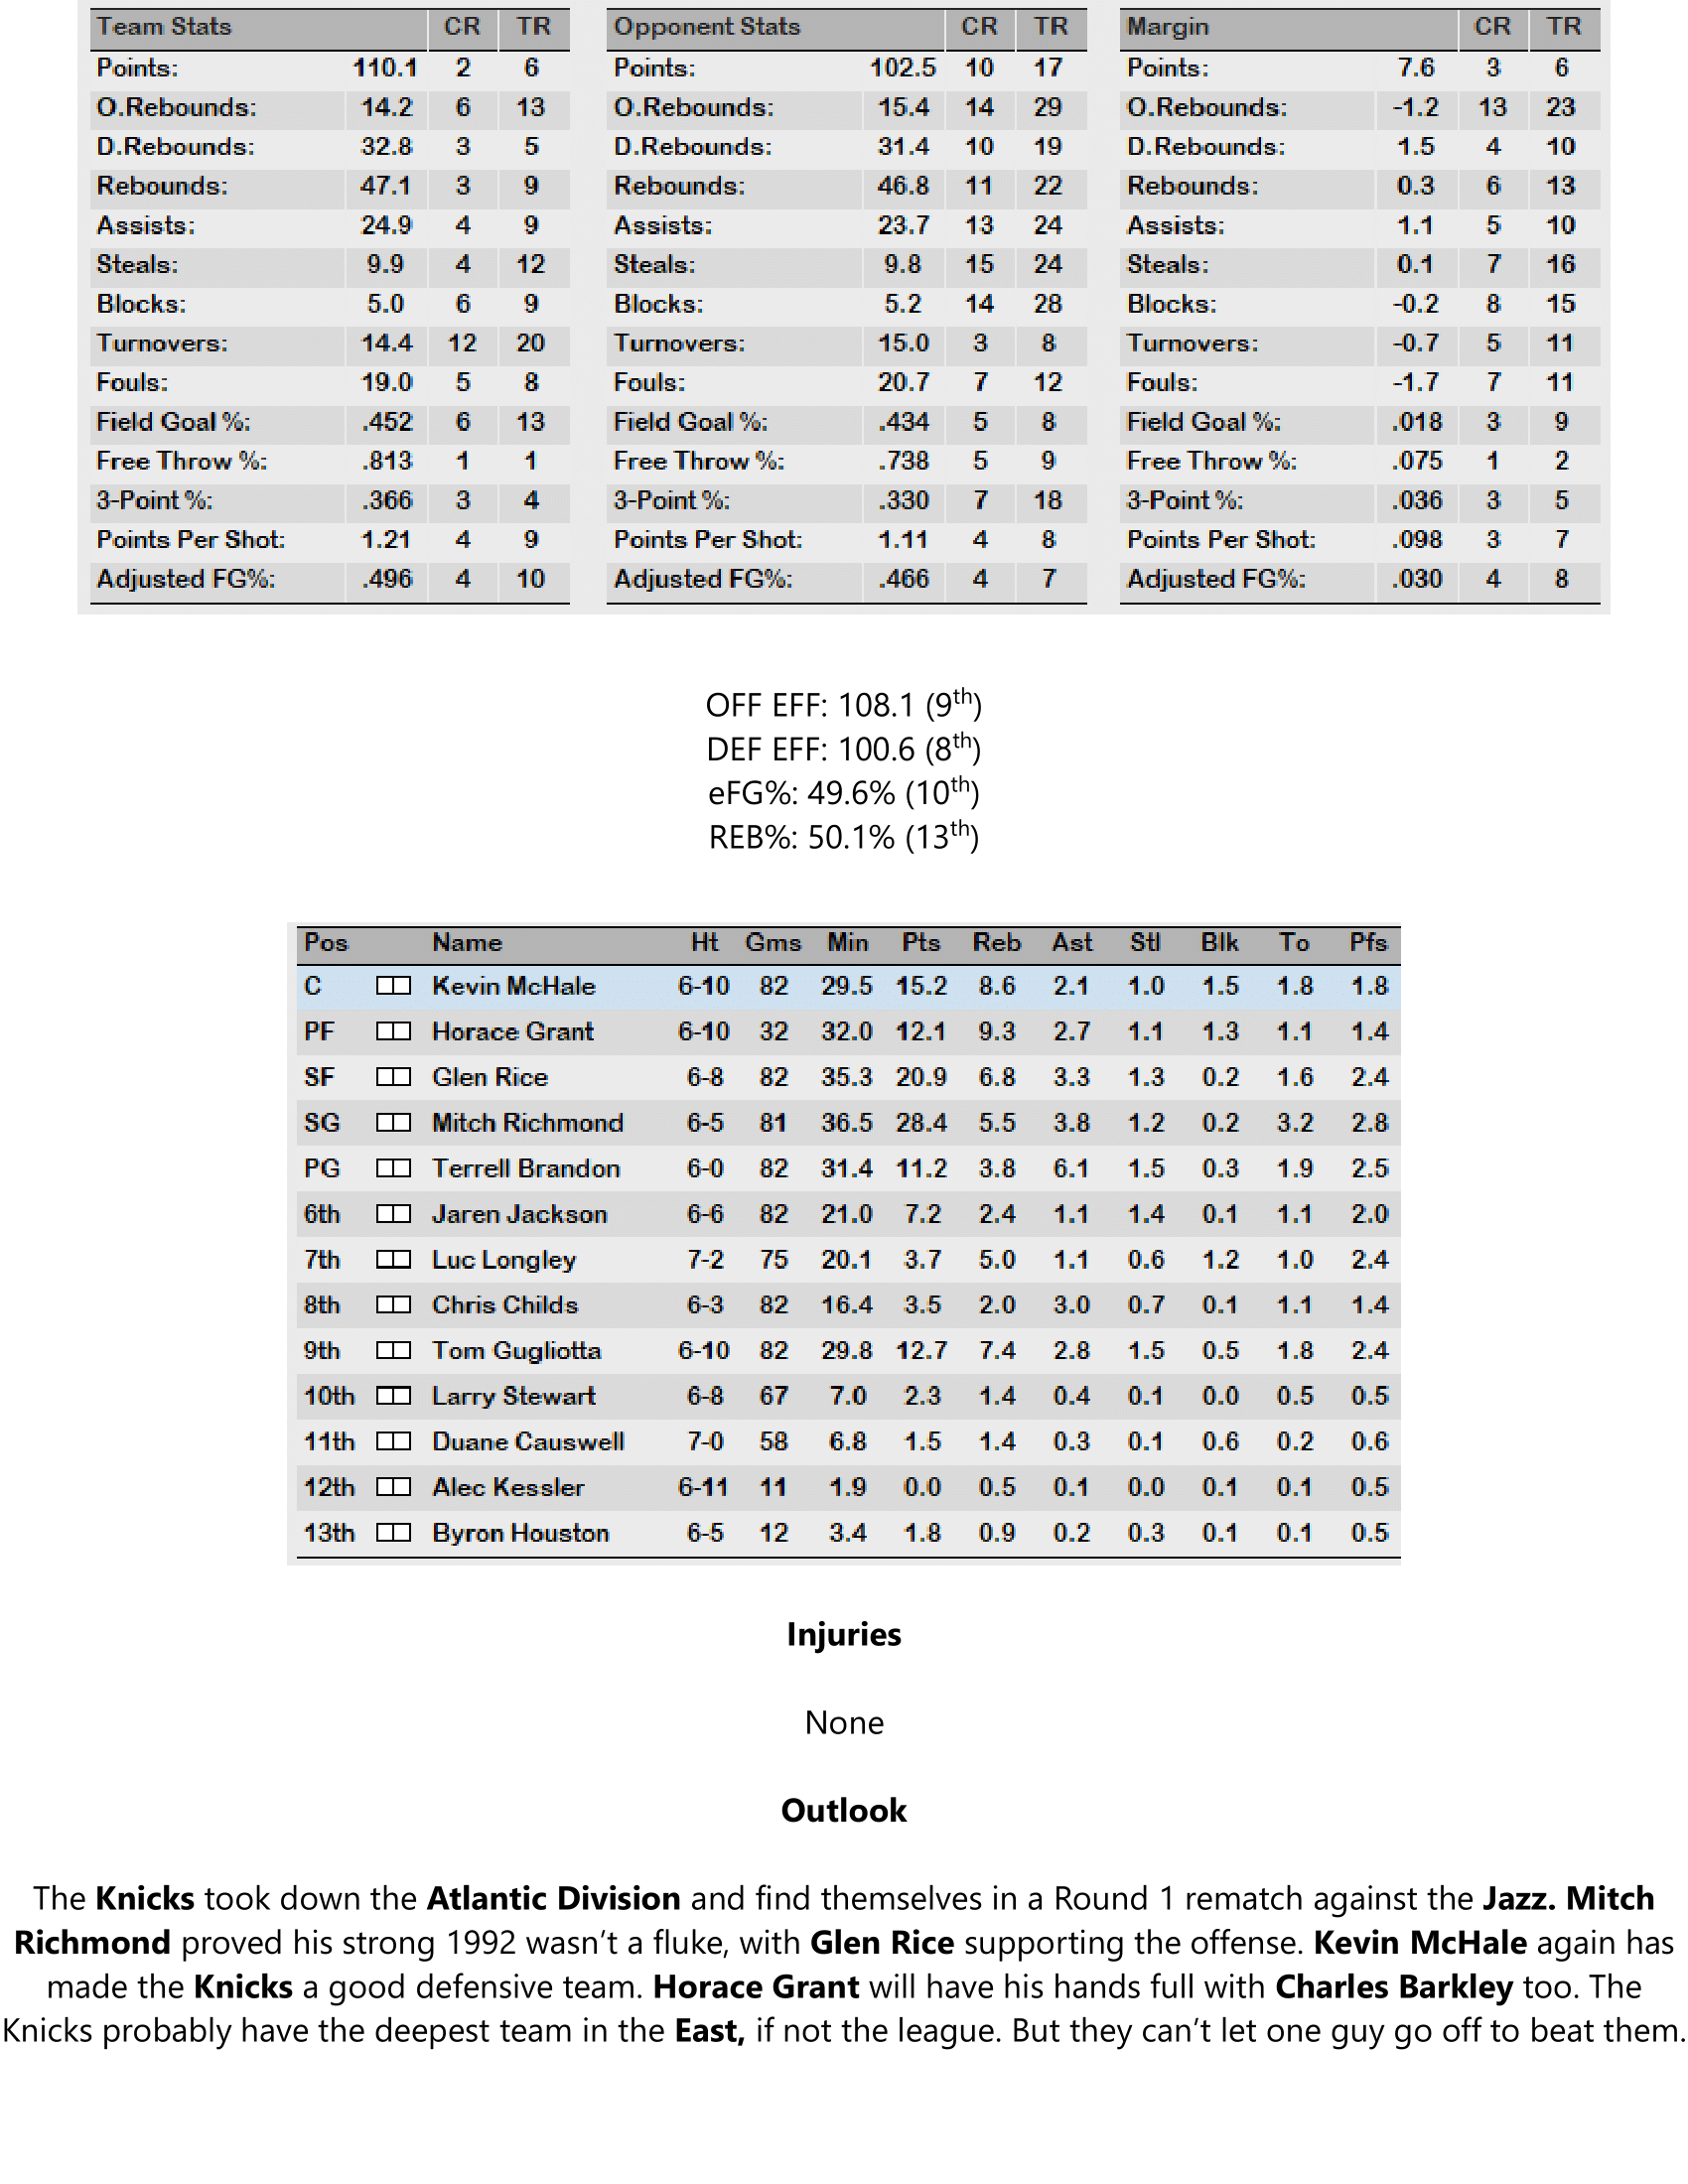 92-93-Part-4-Playoff-Preview-16.png